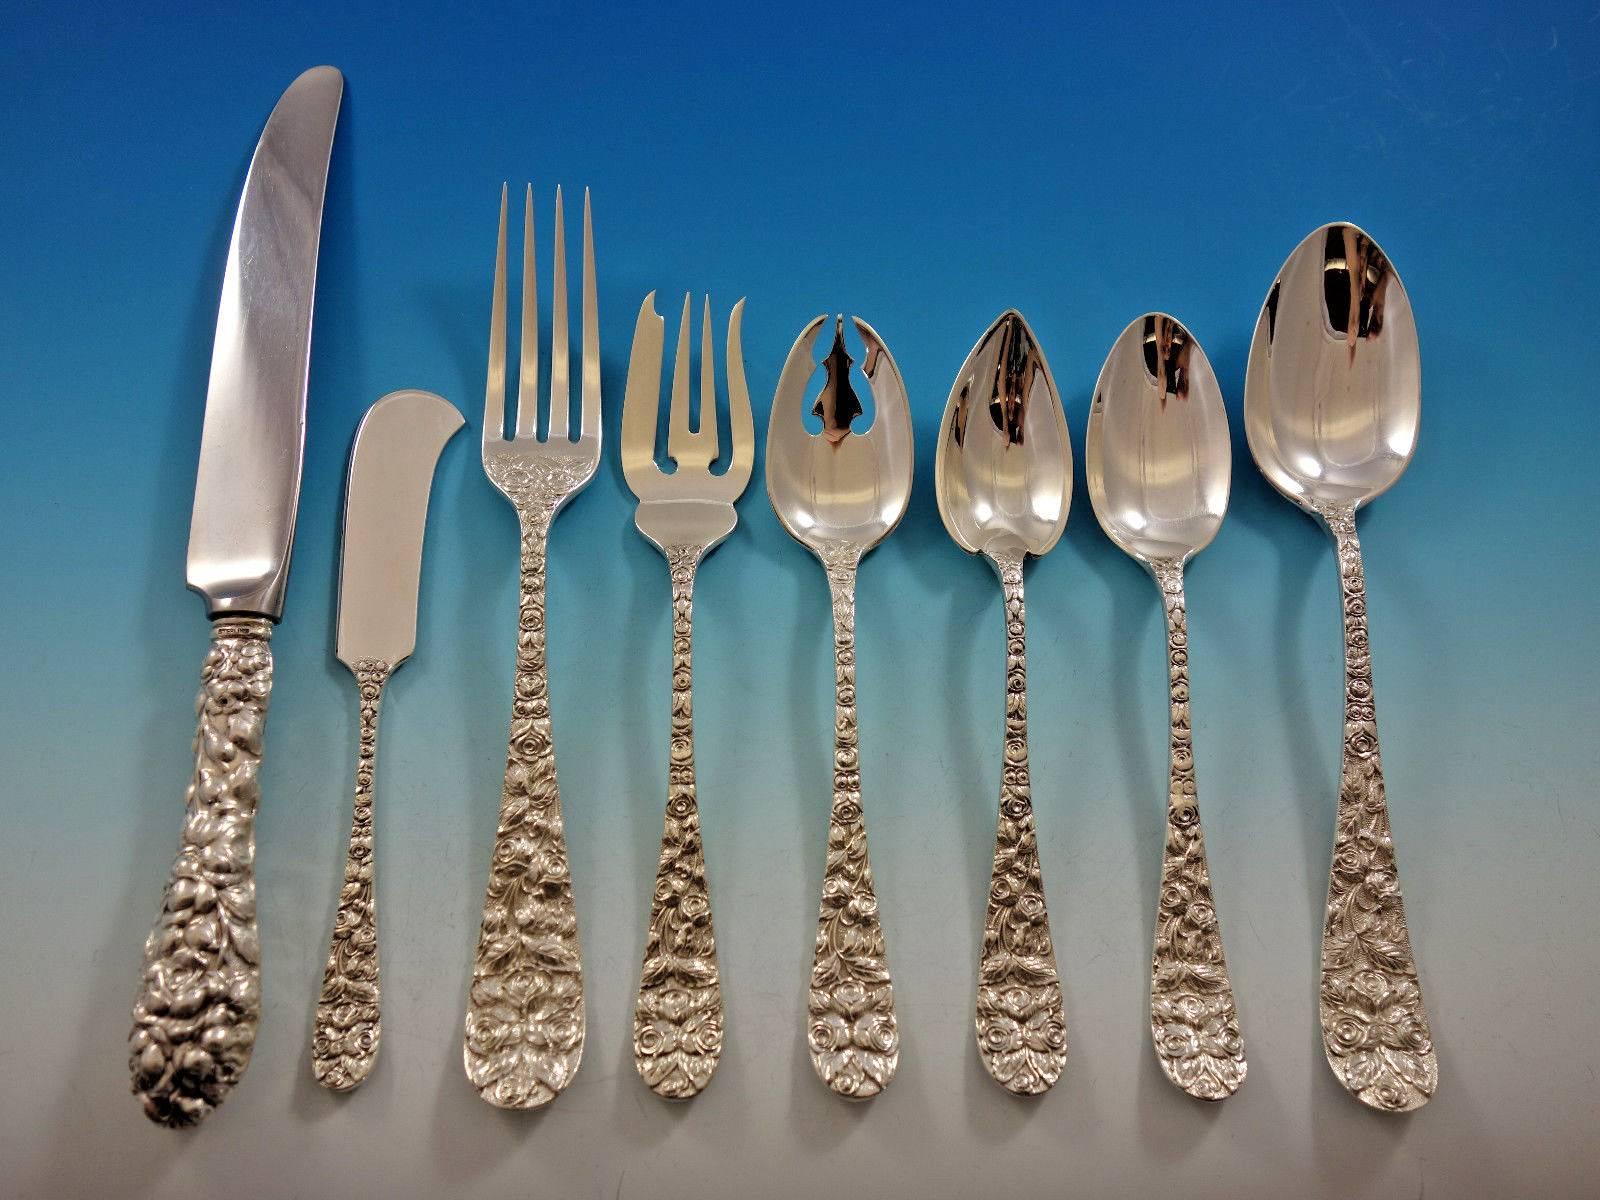 Baltimore rose by Schofield repousse sterling silver flatware set - 106 pieces. This set includes: 

12 knives, 8 3/8